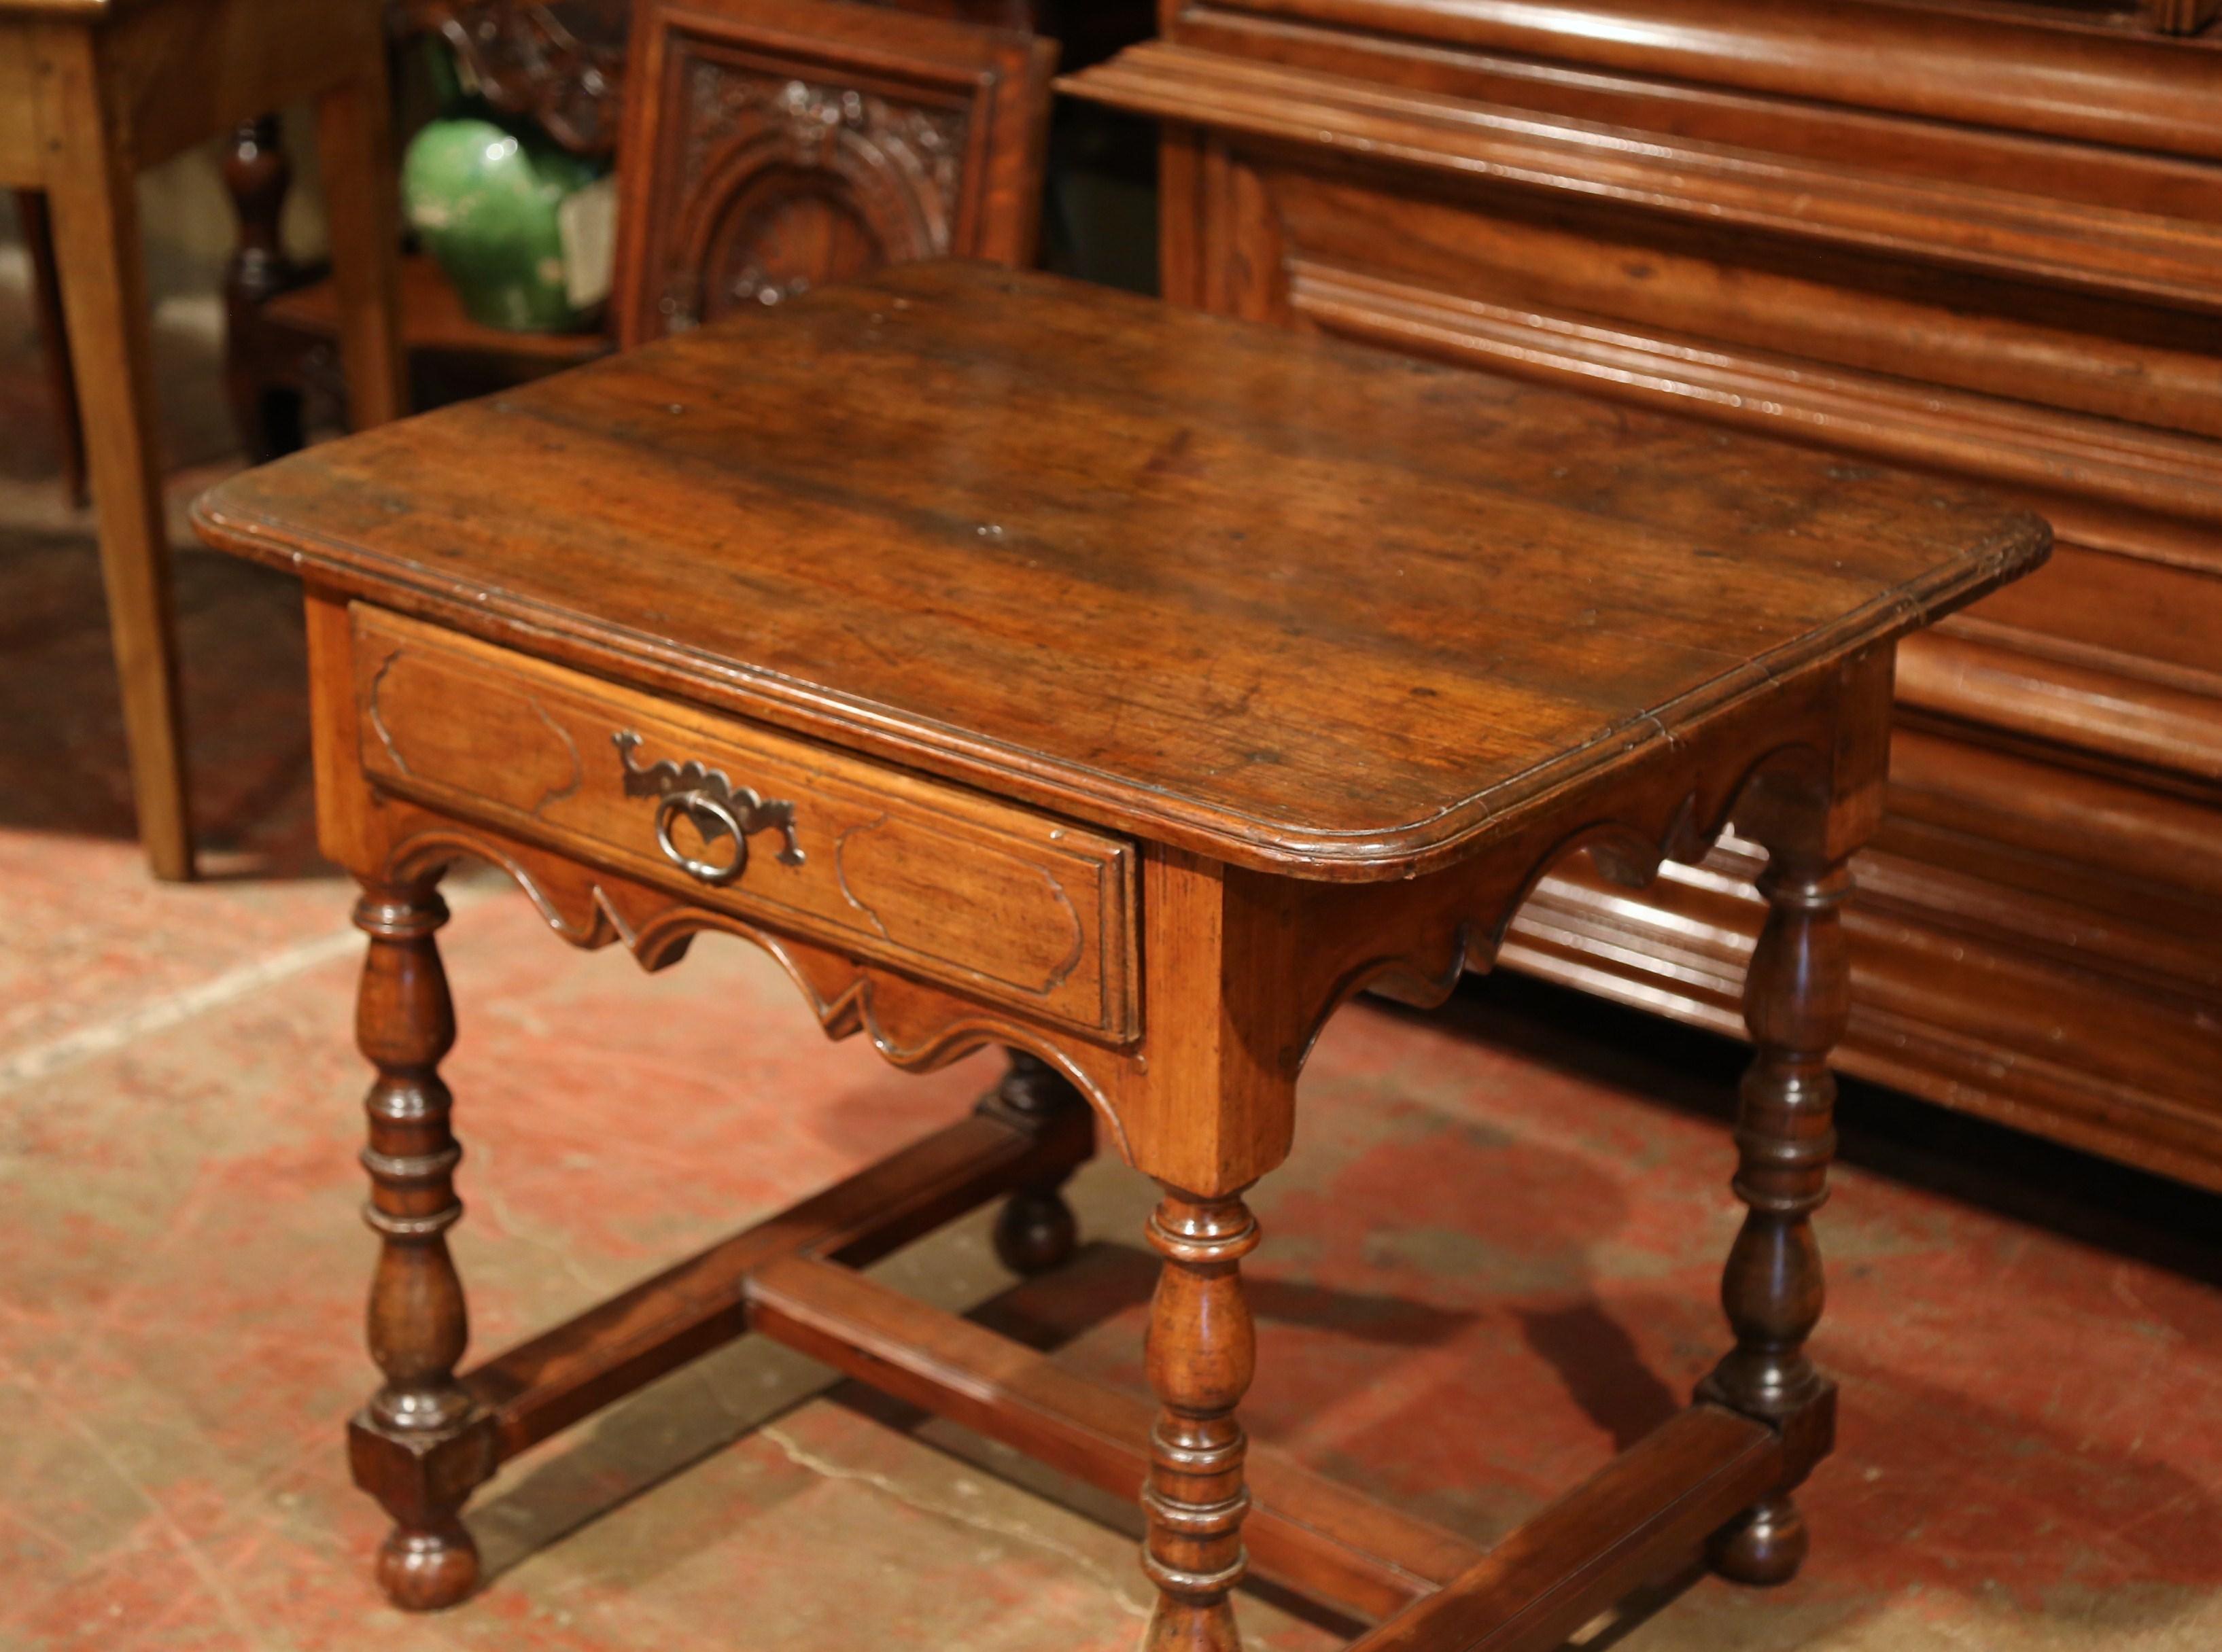 Patinated Mid-18th Century, French, Louis XIII Carved Walnut Table Desk with Center Drawer